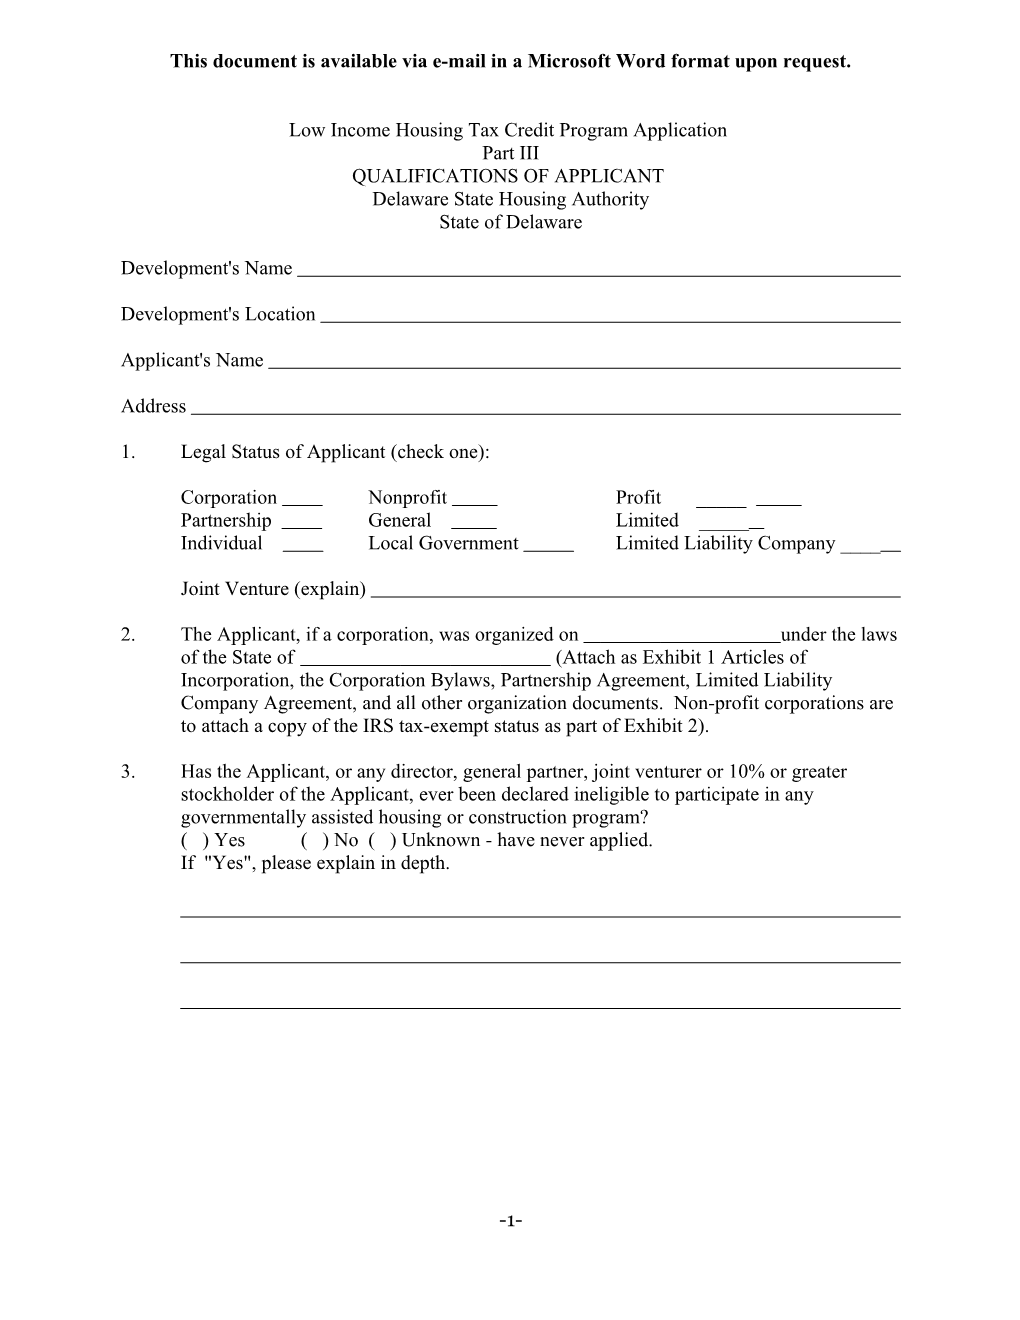 This Document Is Available Via E-Mail in a Microsoft Word Format Upon Request